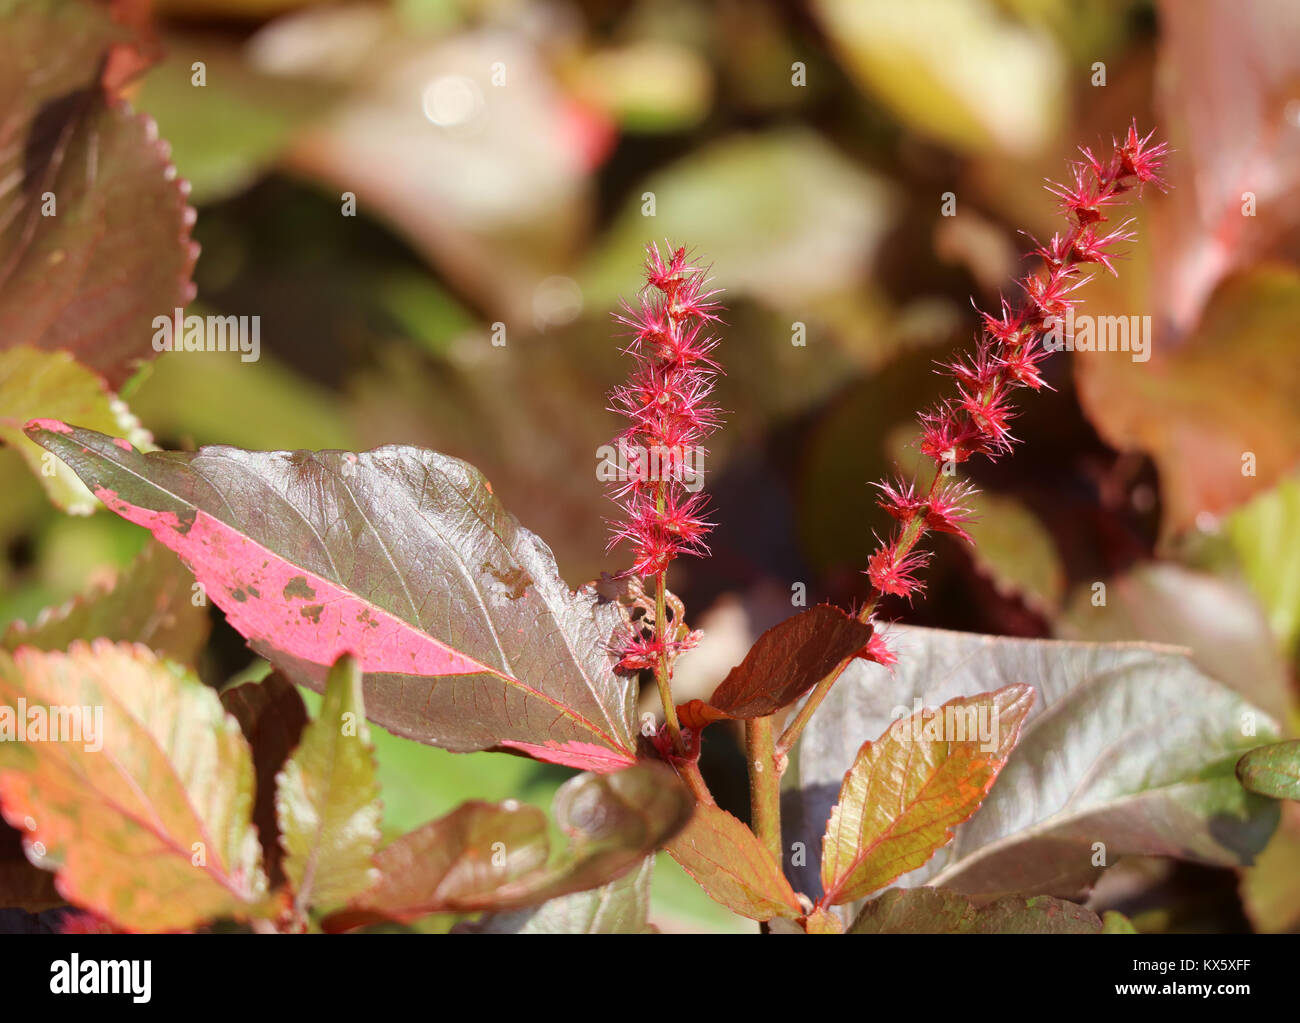 Closed up blooming vibrant red Acalypha wilkesiana flowers in the sunlight, Thailand Stock Photo